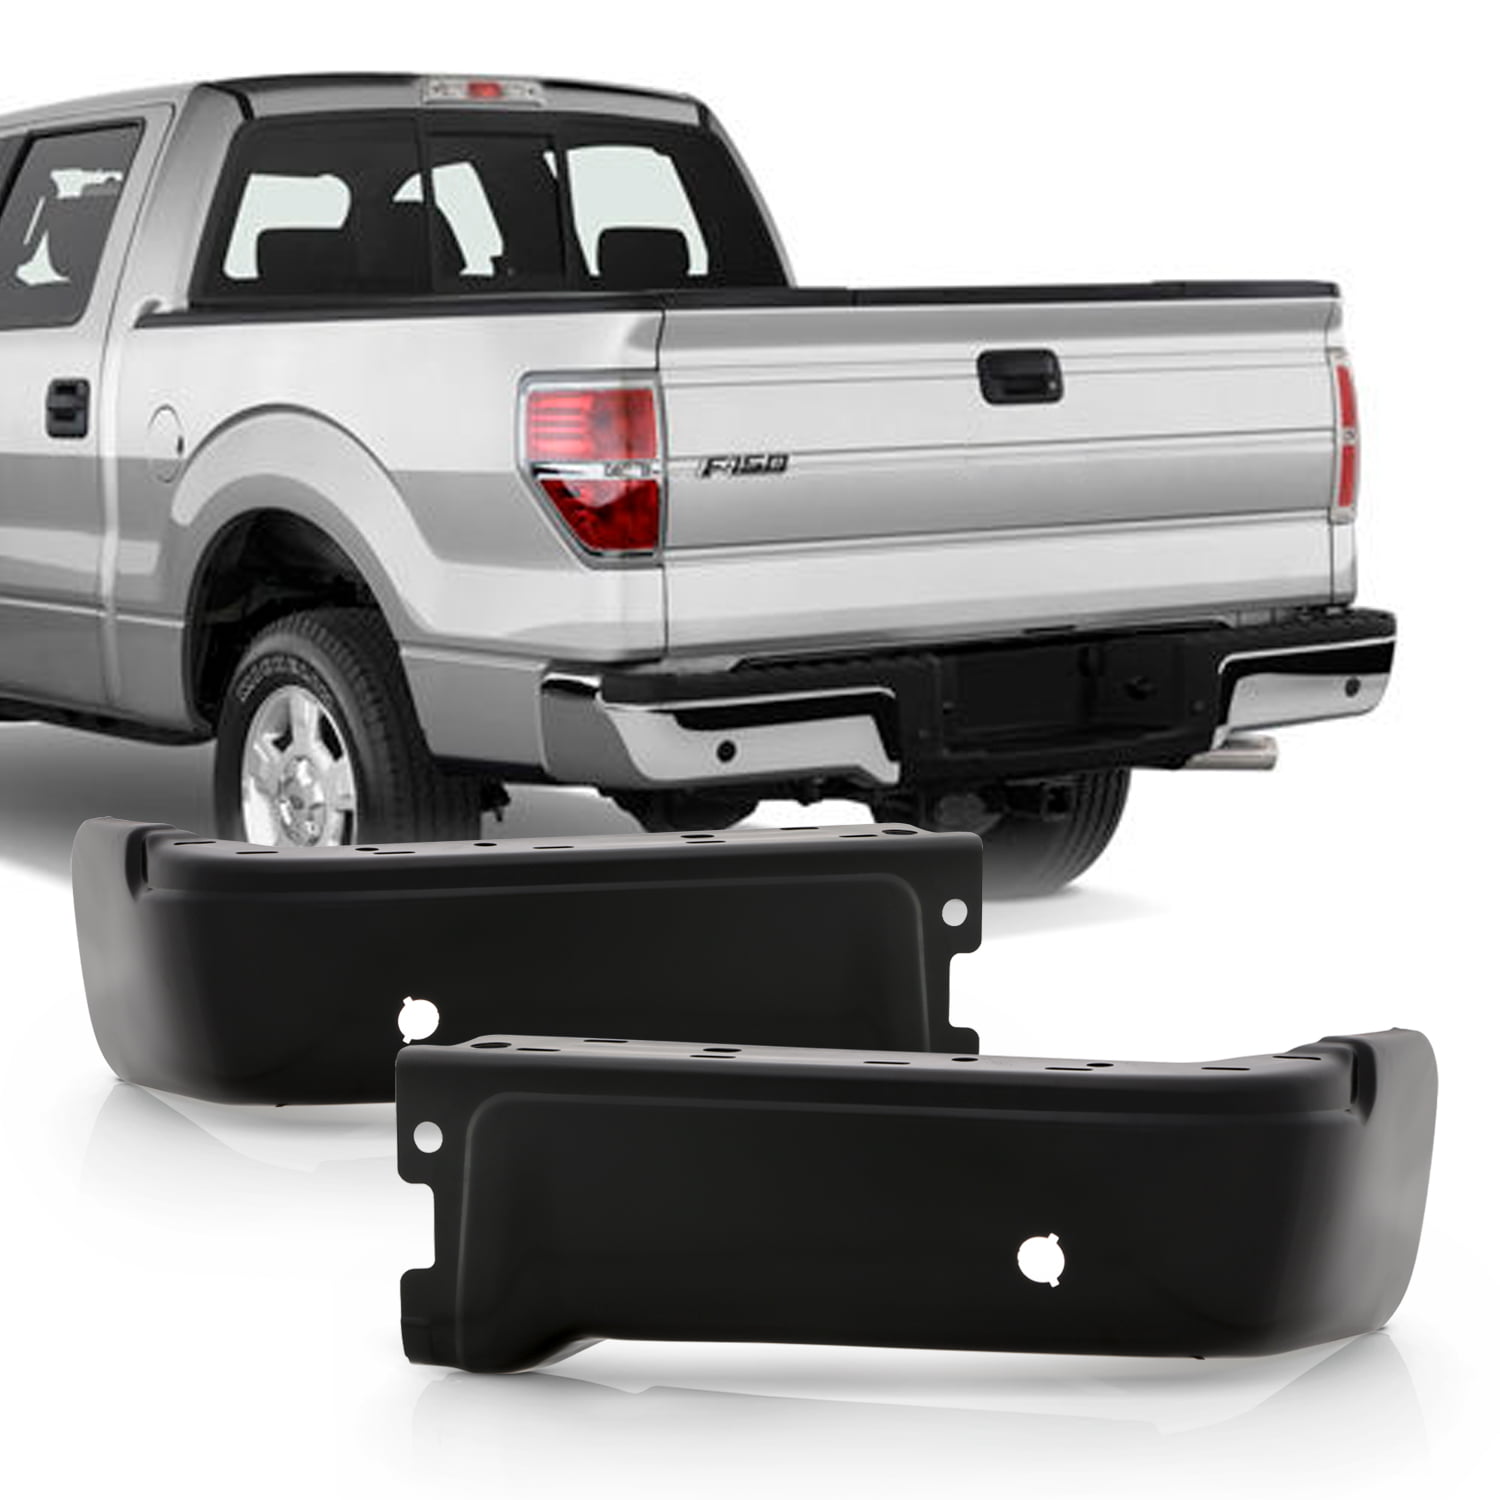 Fo 2-Pc Left And Right ; Chrome; With Park Assist Sensor Holes; Made Of Steel; Partslink FO1102381 2015-2018 Ford F150 Rear Bumper Face Bar 